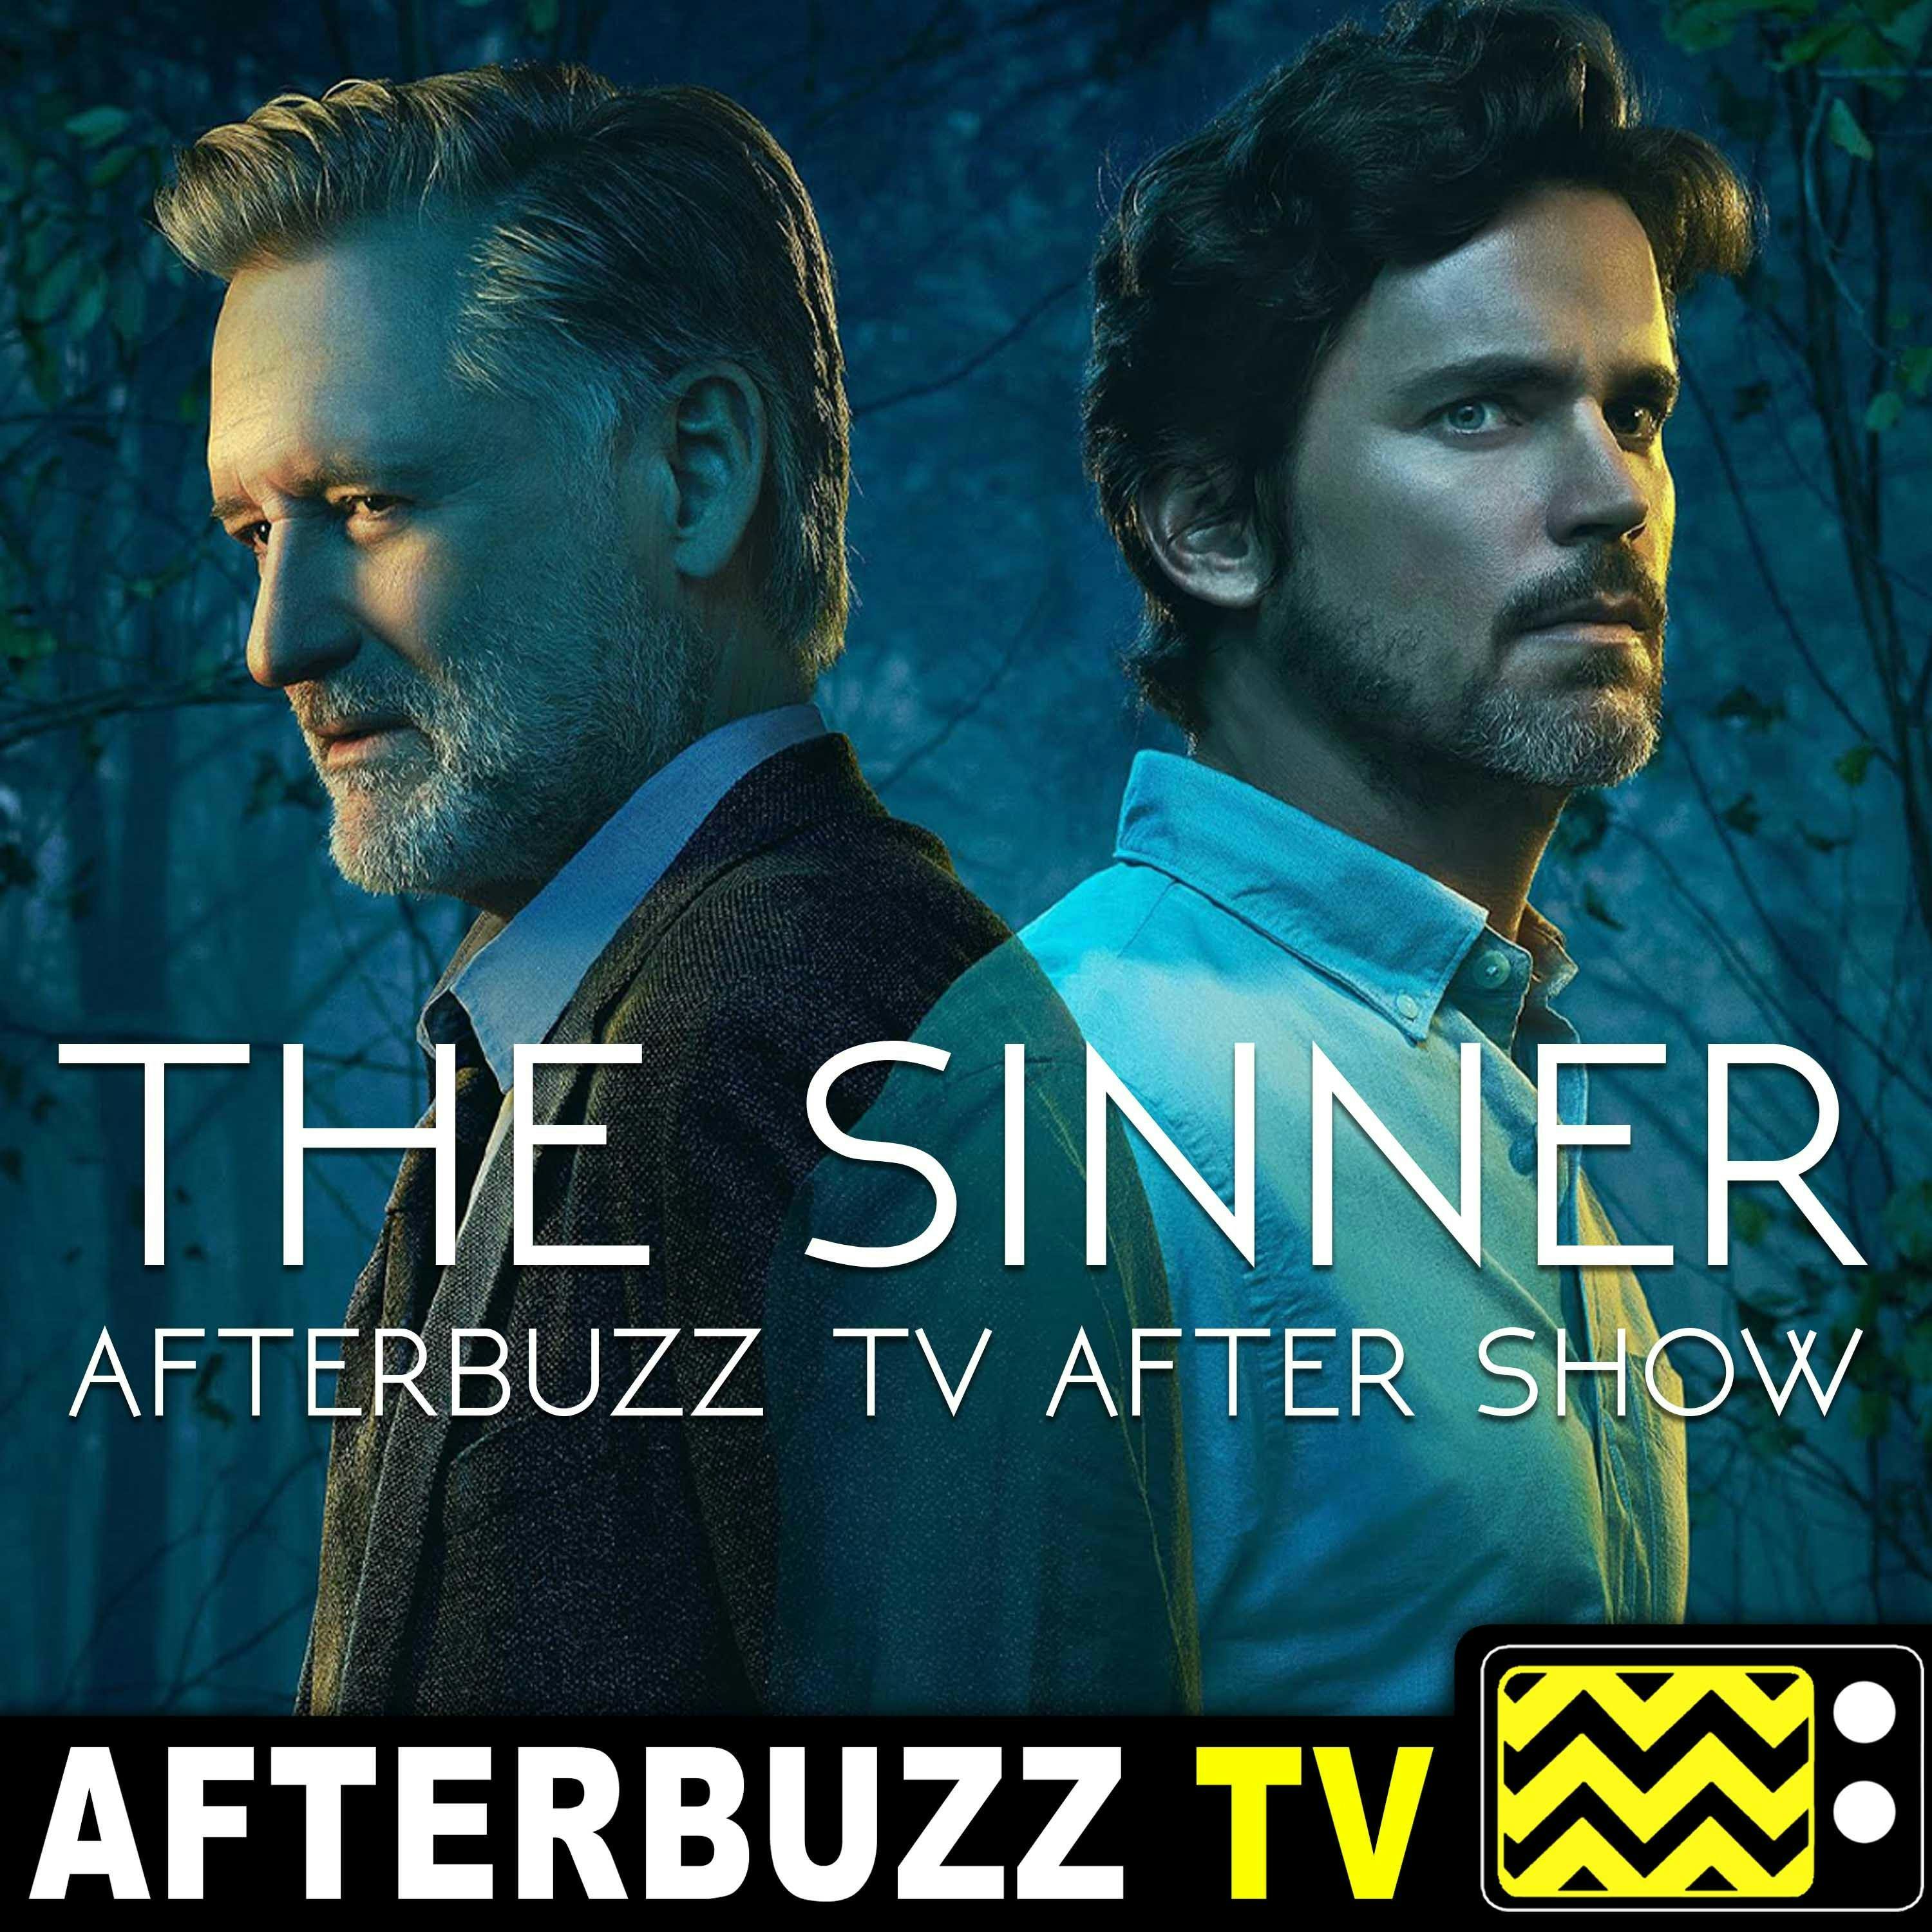 A Death By Their Side - S3 E8 ’The Sinner’ Recap & Review